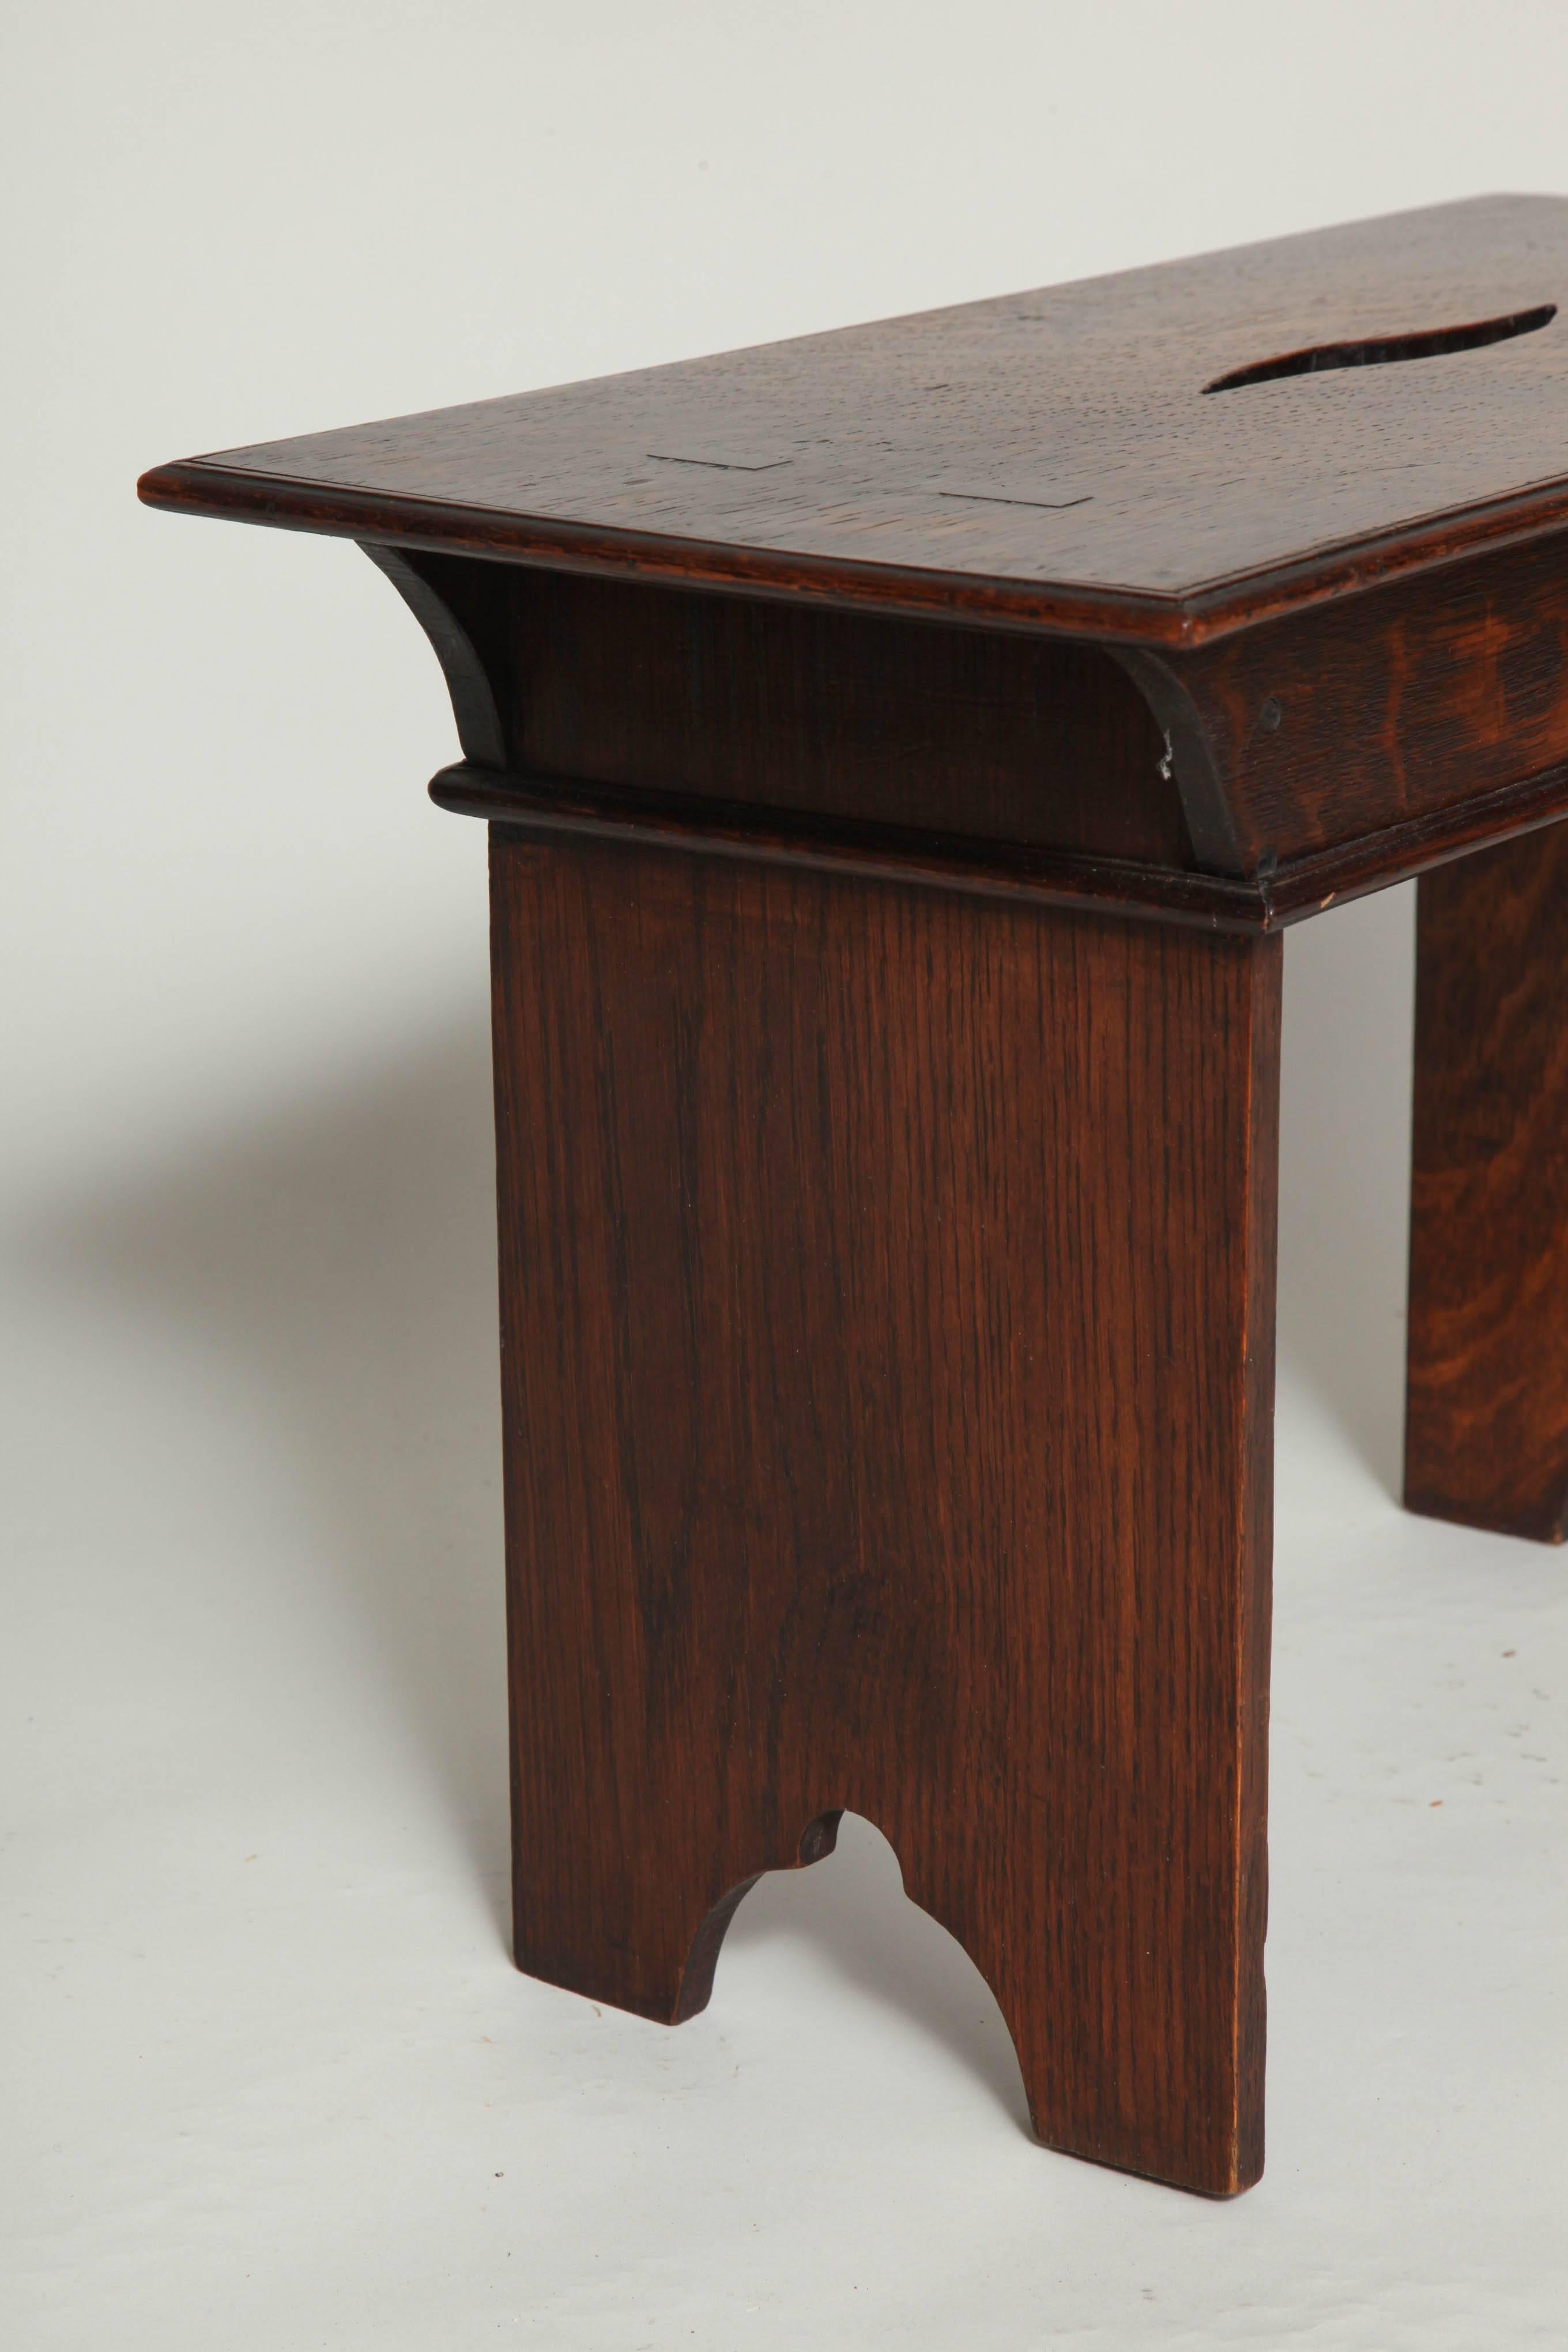 Fine English Arts and Crafts period oak stool, the molded top with through tenon construction, over shaped 